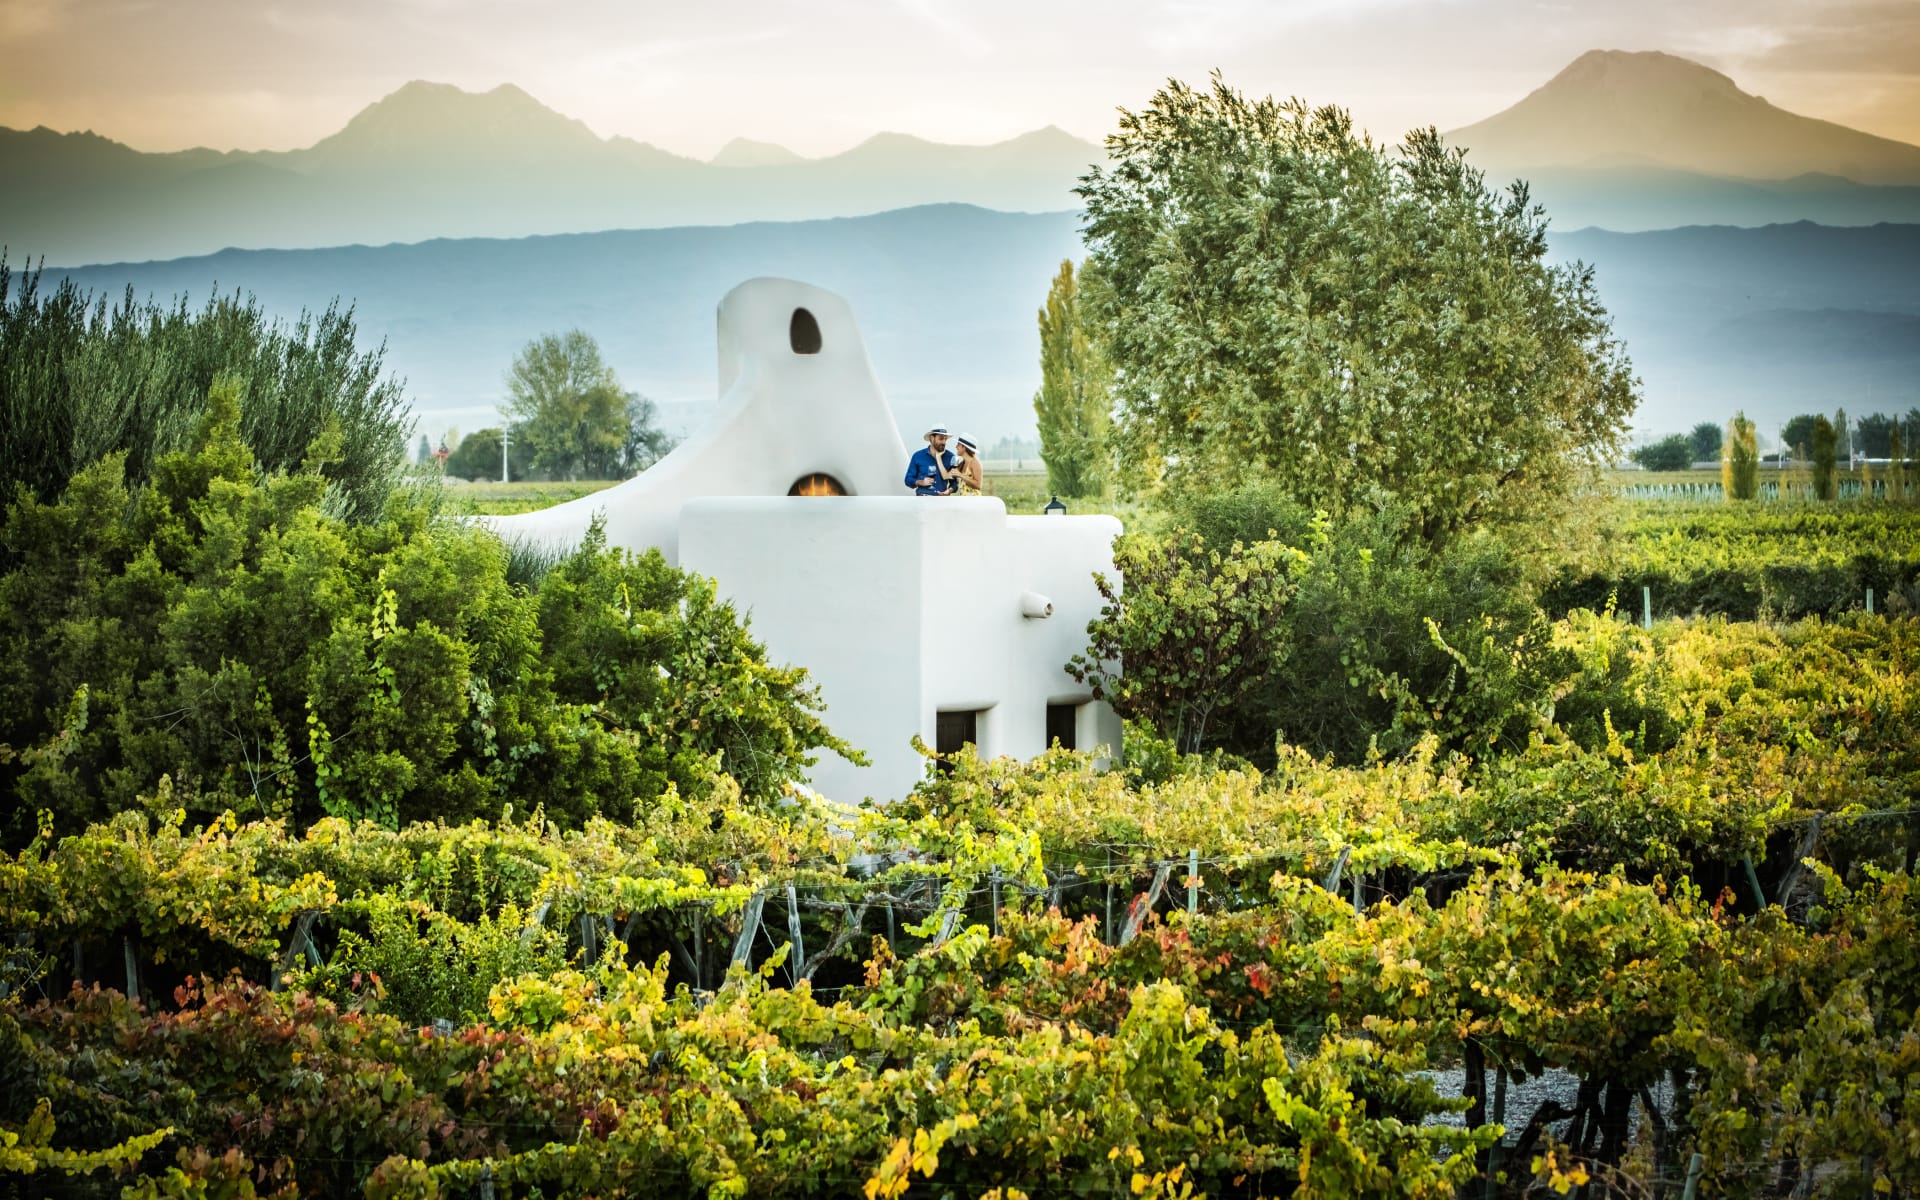 Canvas Wine Lodge sits in the middle of a vineyard with The Andes in the background.